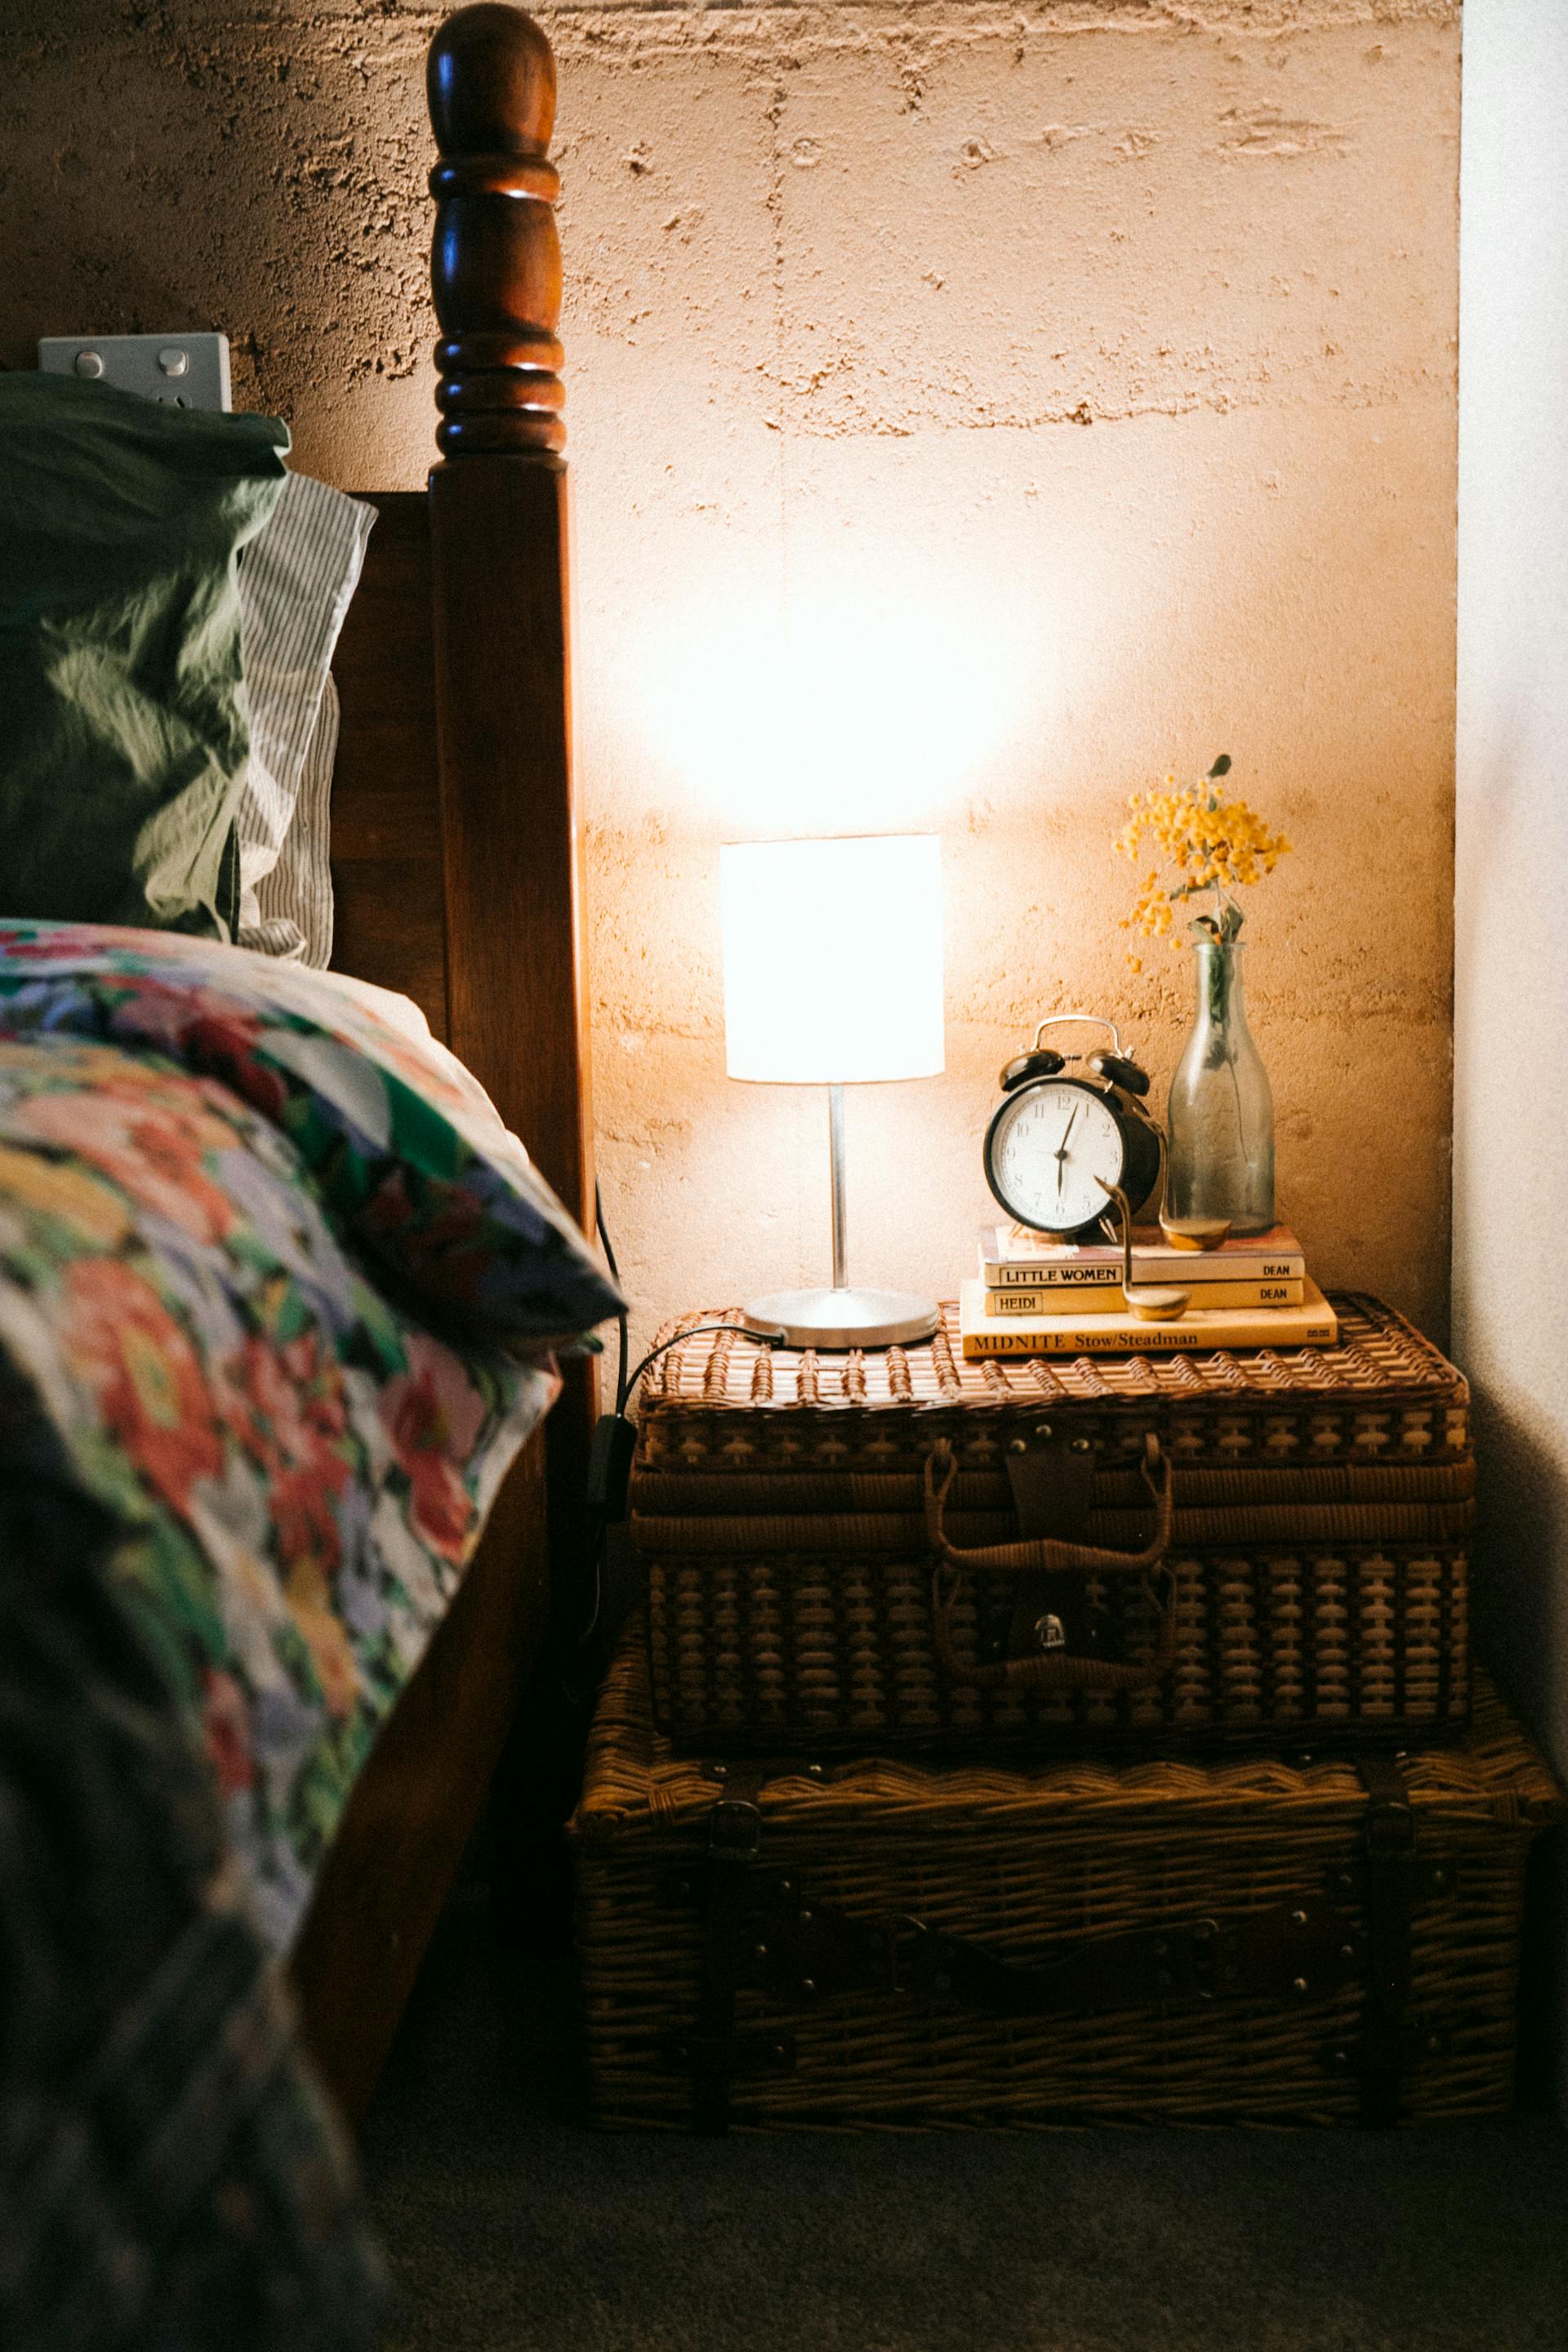 Bedroom with bedside lamp on | Source: Pexels